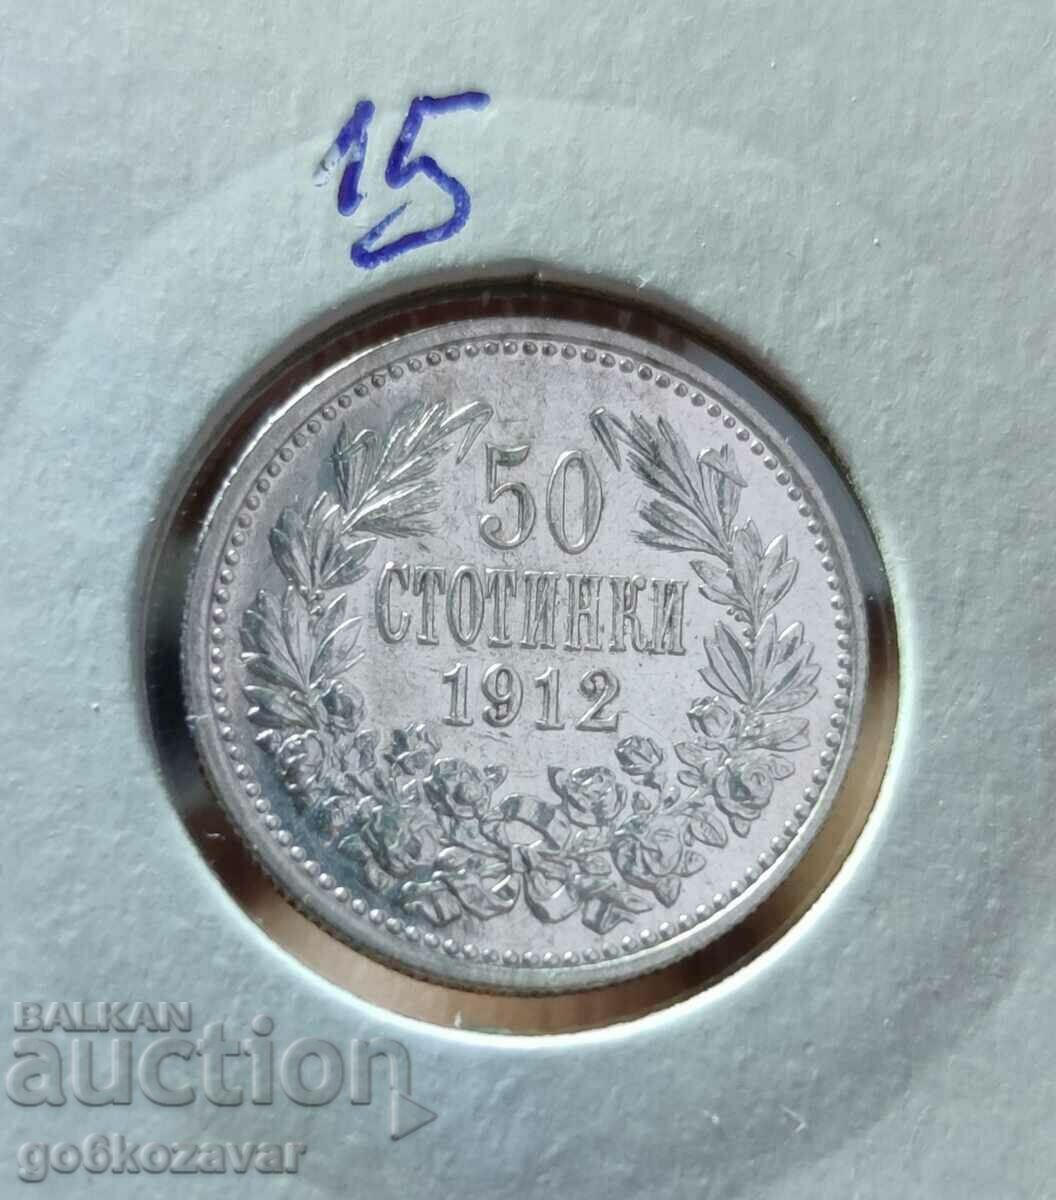 Bulgaria 50 cent, 1912 Silver UNC Collection!